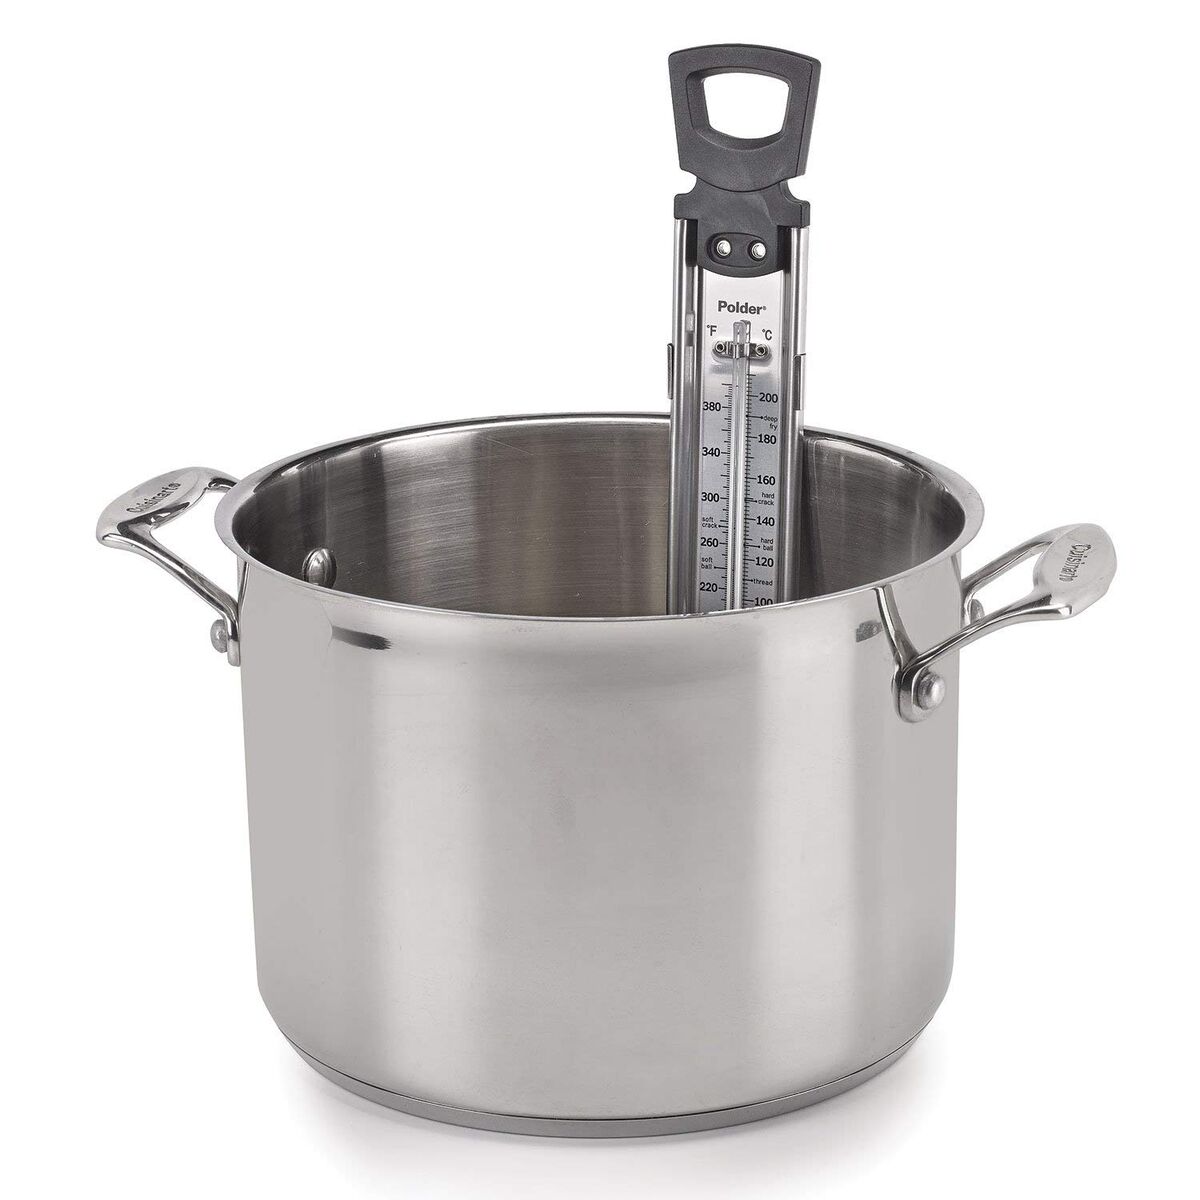 Polder Candy thermometer resting in a pot